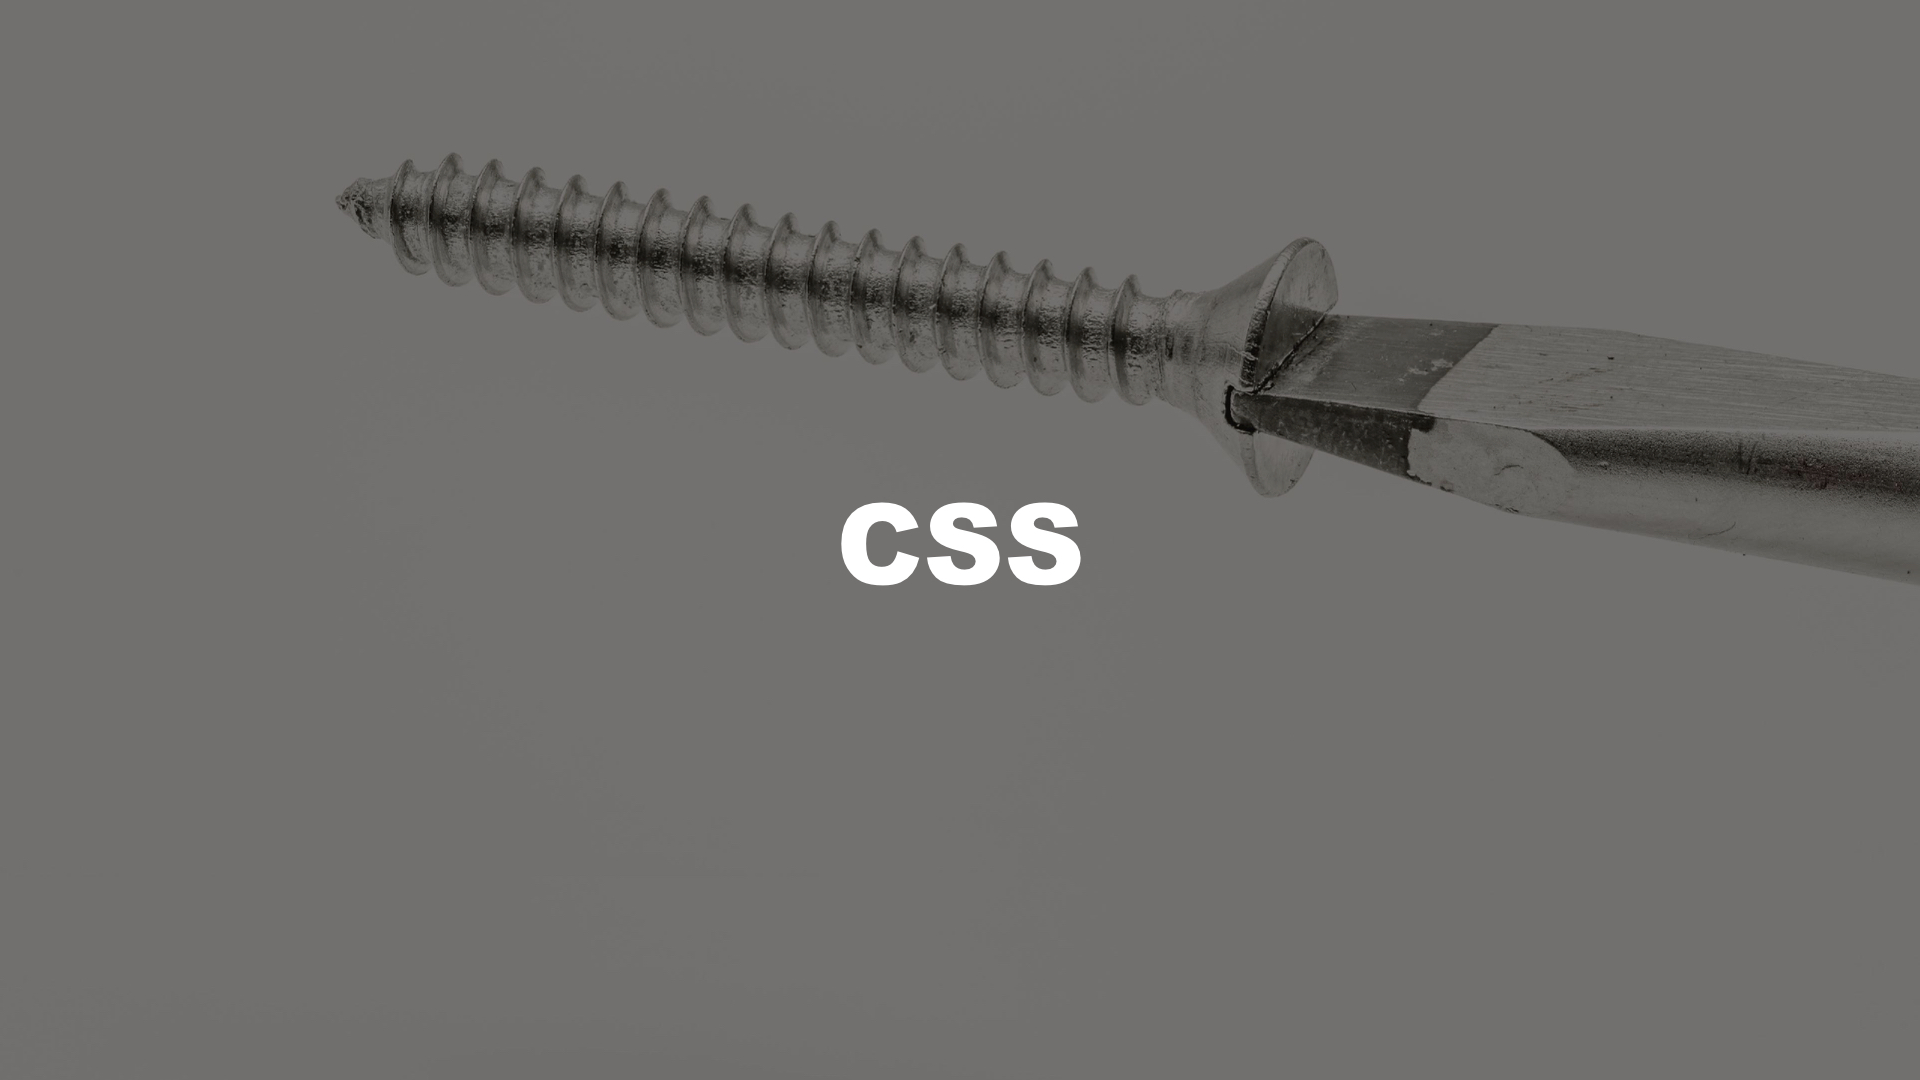 CSS is like the Flat Head Screw, Effective yet not as efficient for mass production